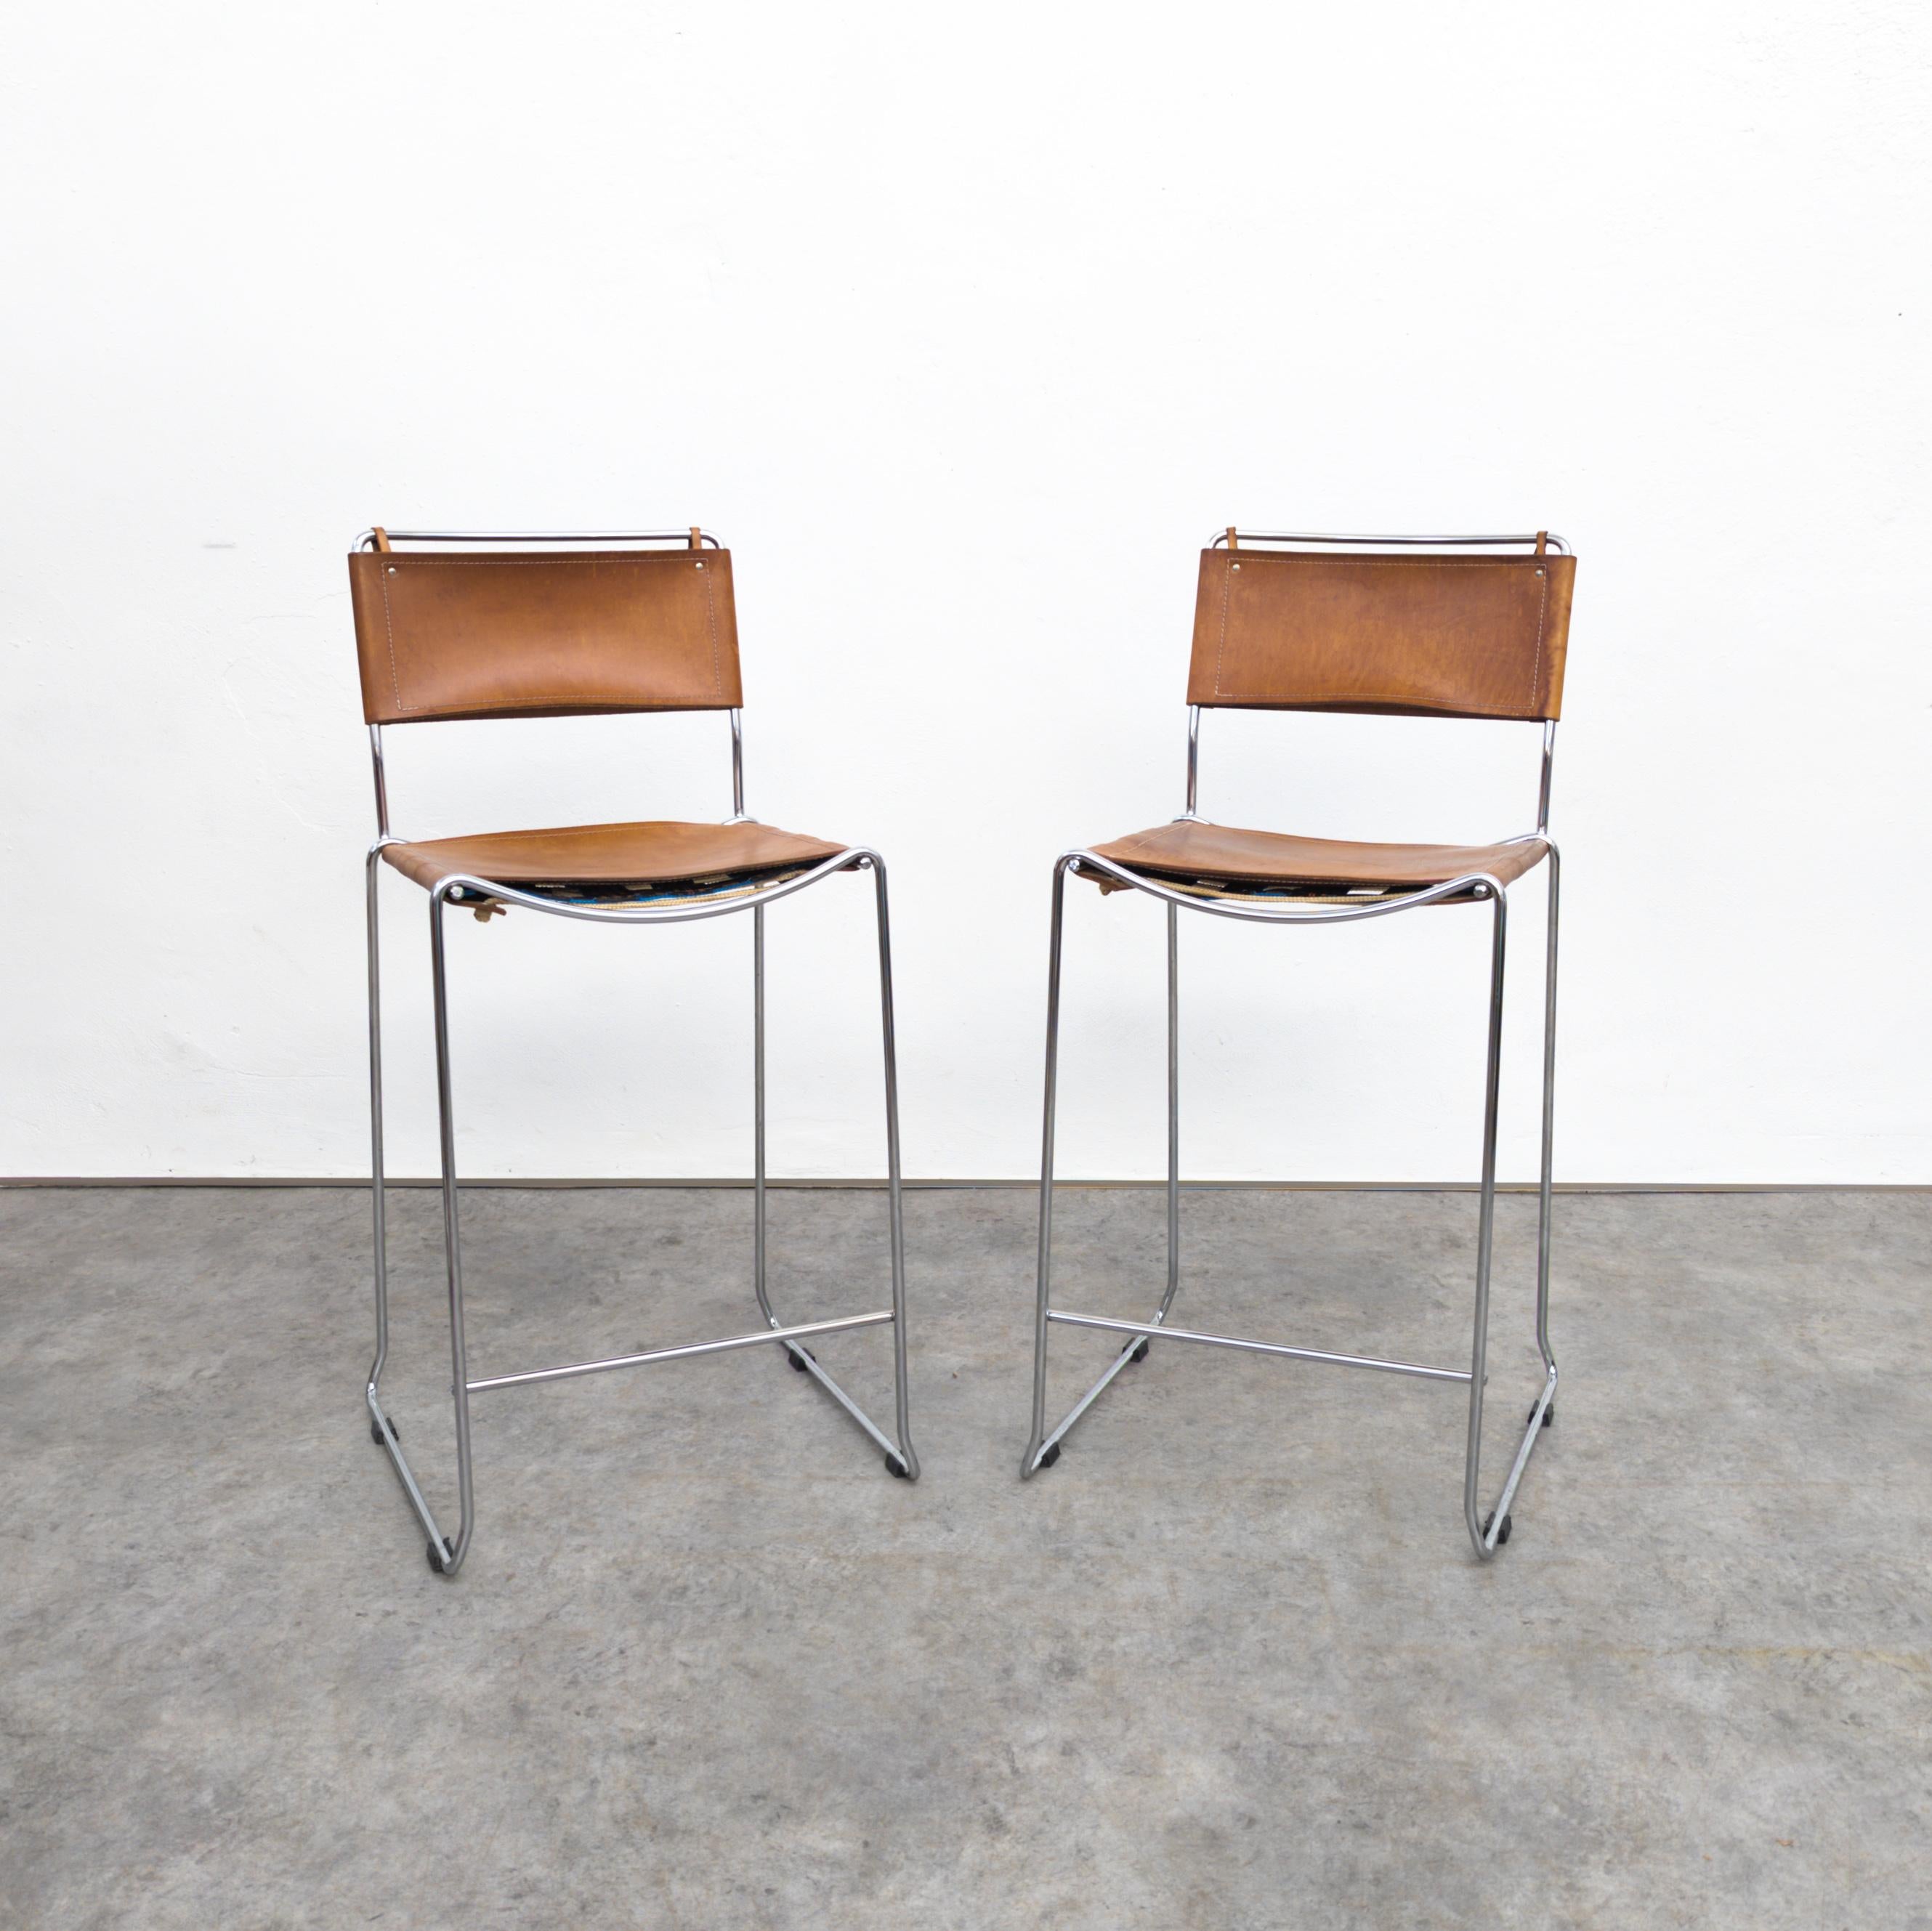 A  pair of 1970s Italian bar stools designed by Giandomenico Belotti for Alias. Leather seats affixed to a sturdy chrome frame. In very good vintage condition with lovely patinated high quality saddle leather. Height 87 cm, width 45 cm, depth 40 cm,